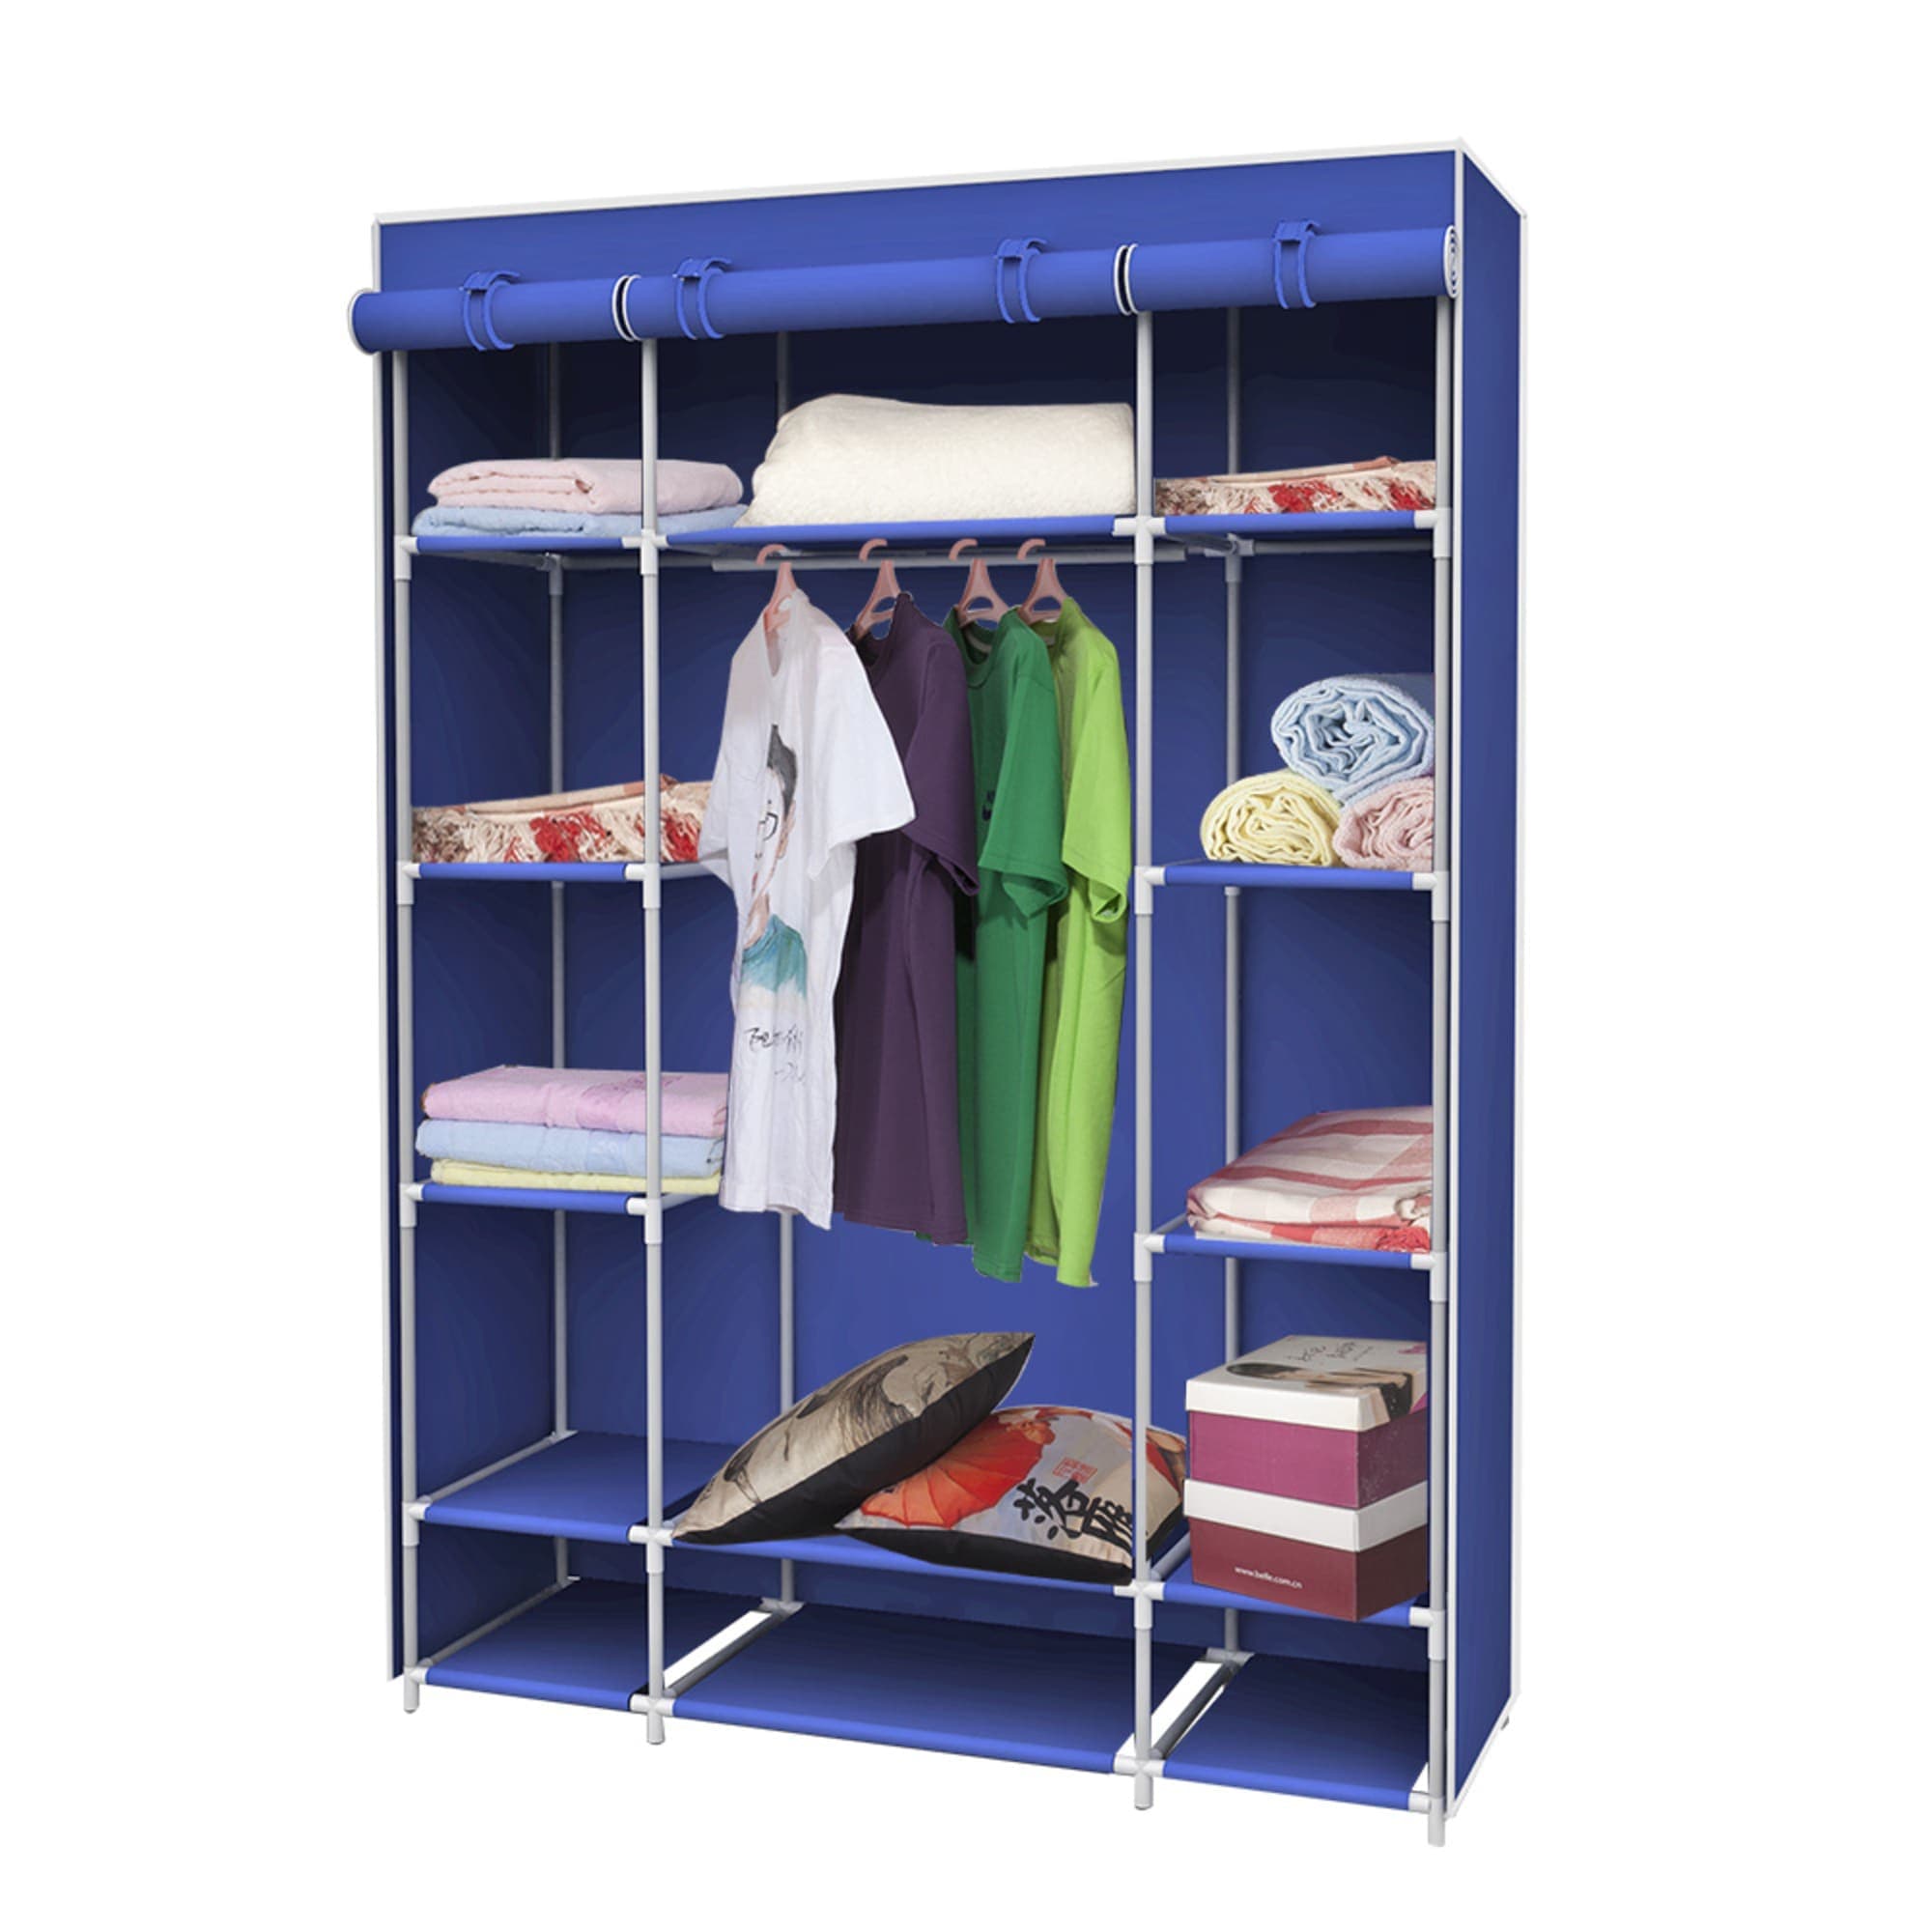 Home Basics Non-Woven Free-Standing Storage Closet, Navy $30.00 EACH, CASE PACK OF 4